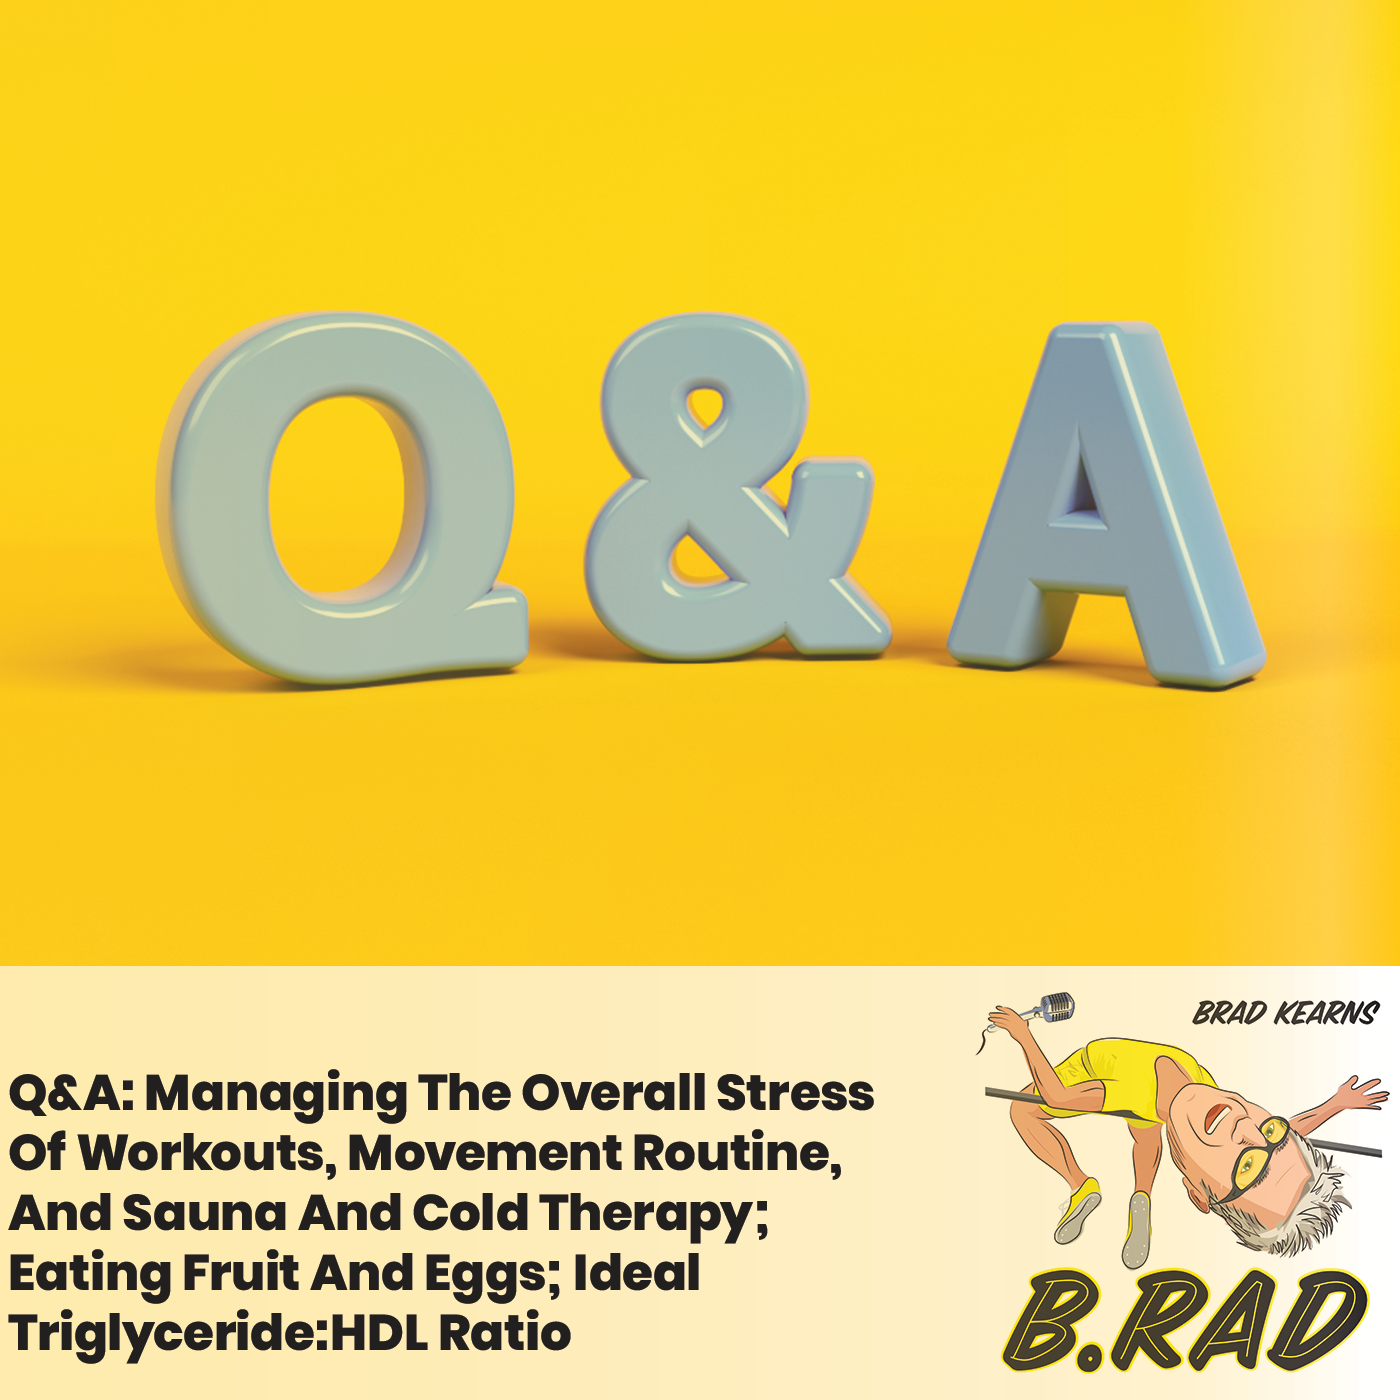 Q&A: Managing The Overall Stress Of Workouts, Movement Routine, And Sauna And Cold Therapy; Eating Fruit And Eggs; Ideal Triglyceride:HDL Ratio